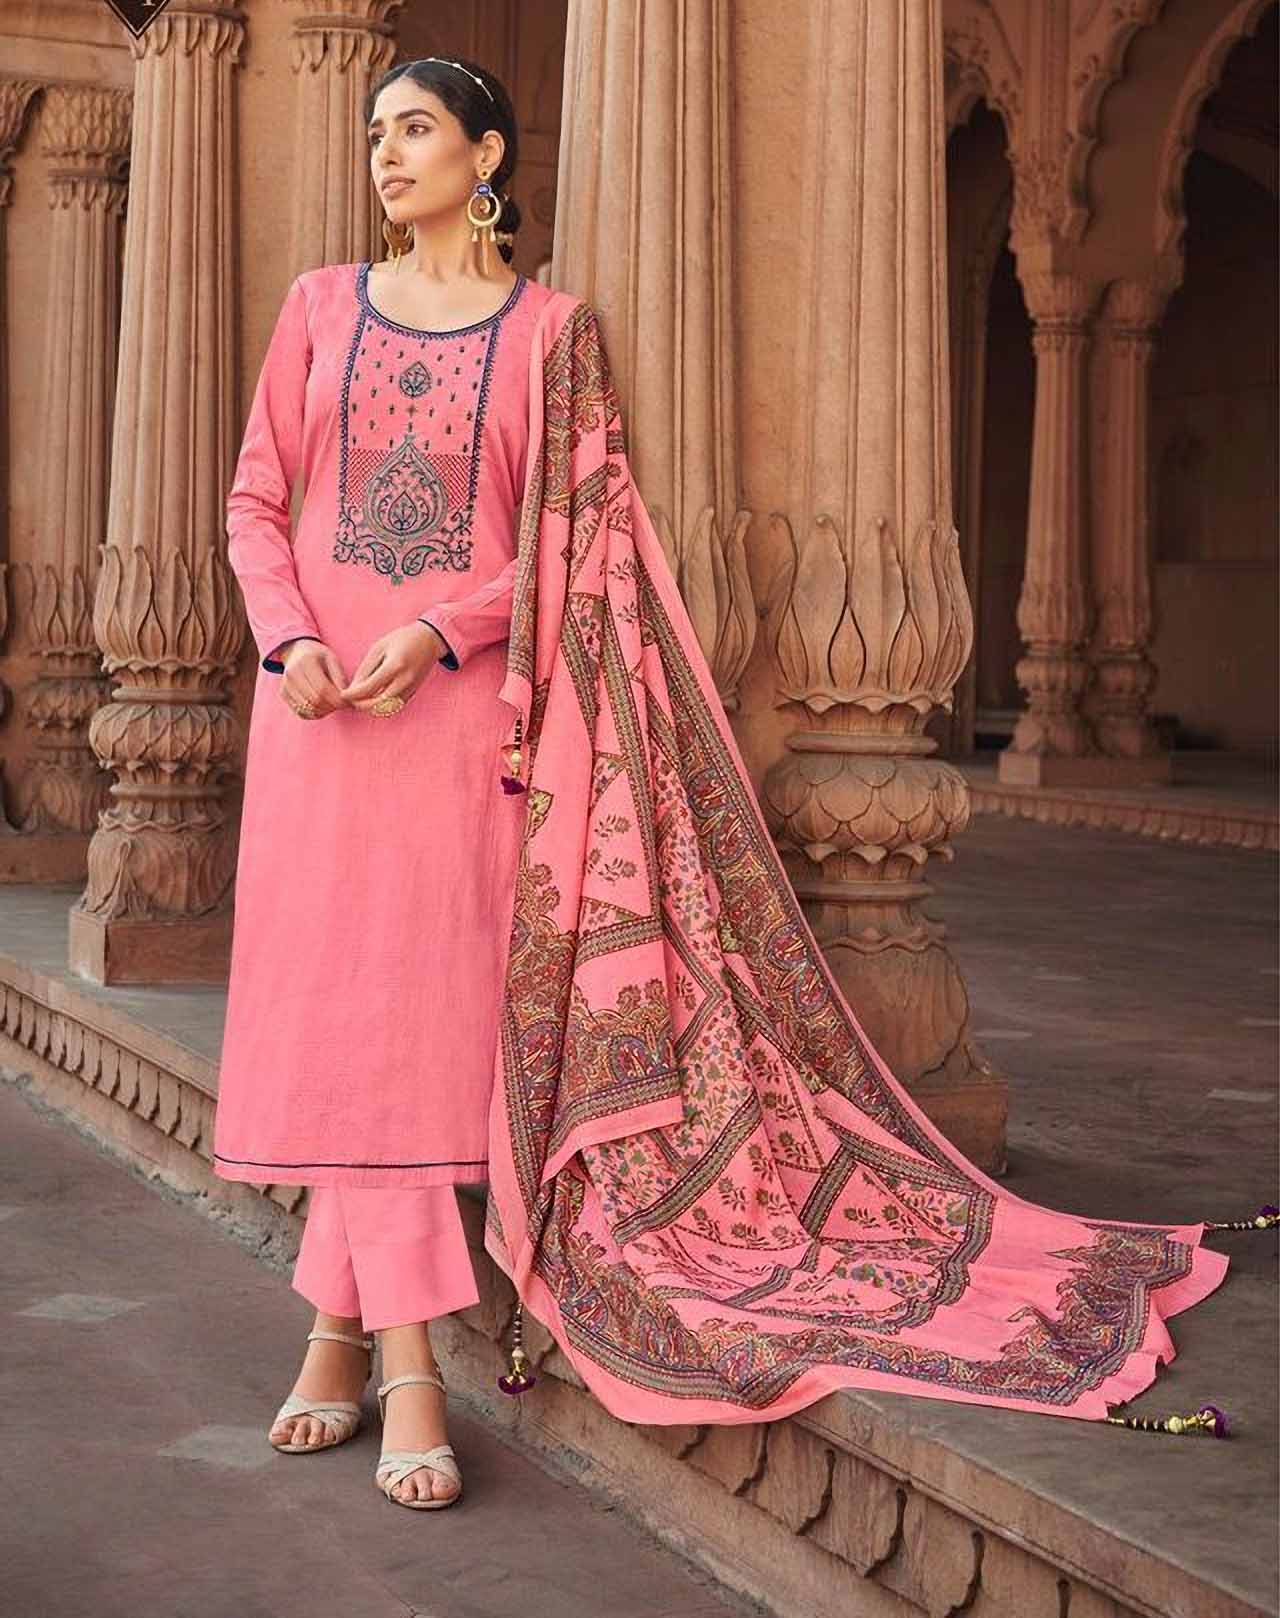 Unstitched Pink Jam Satin Printed Dress Material With Embroidery - Stilento